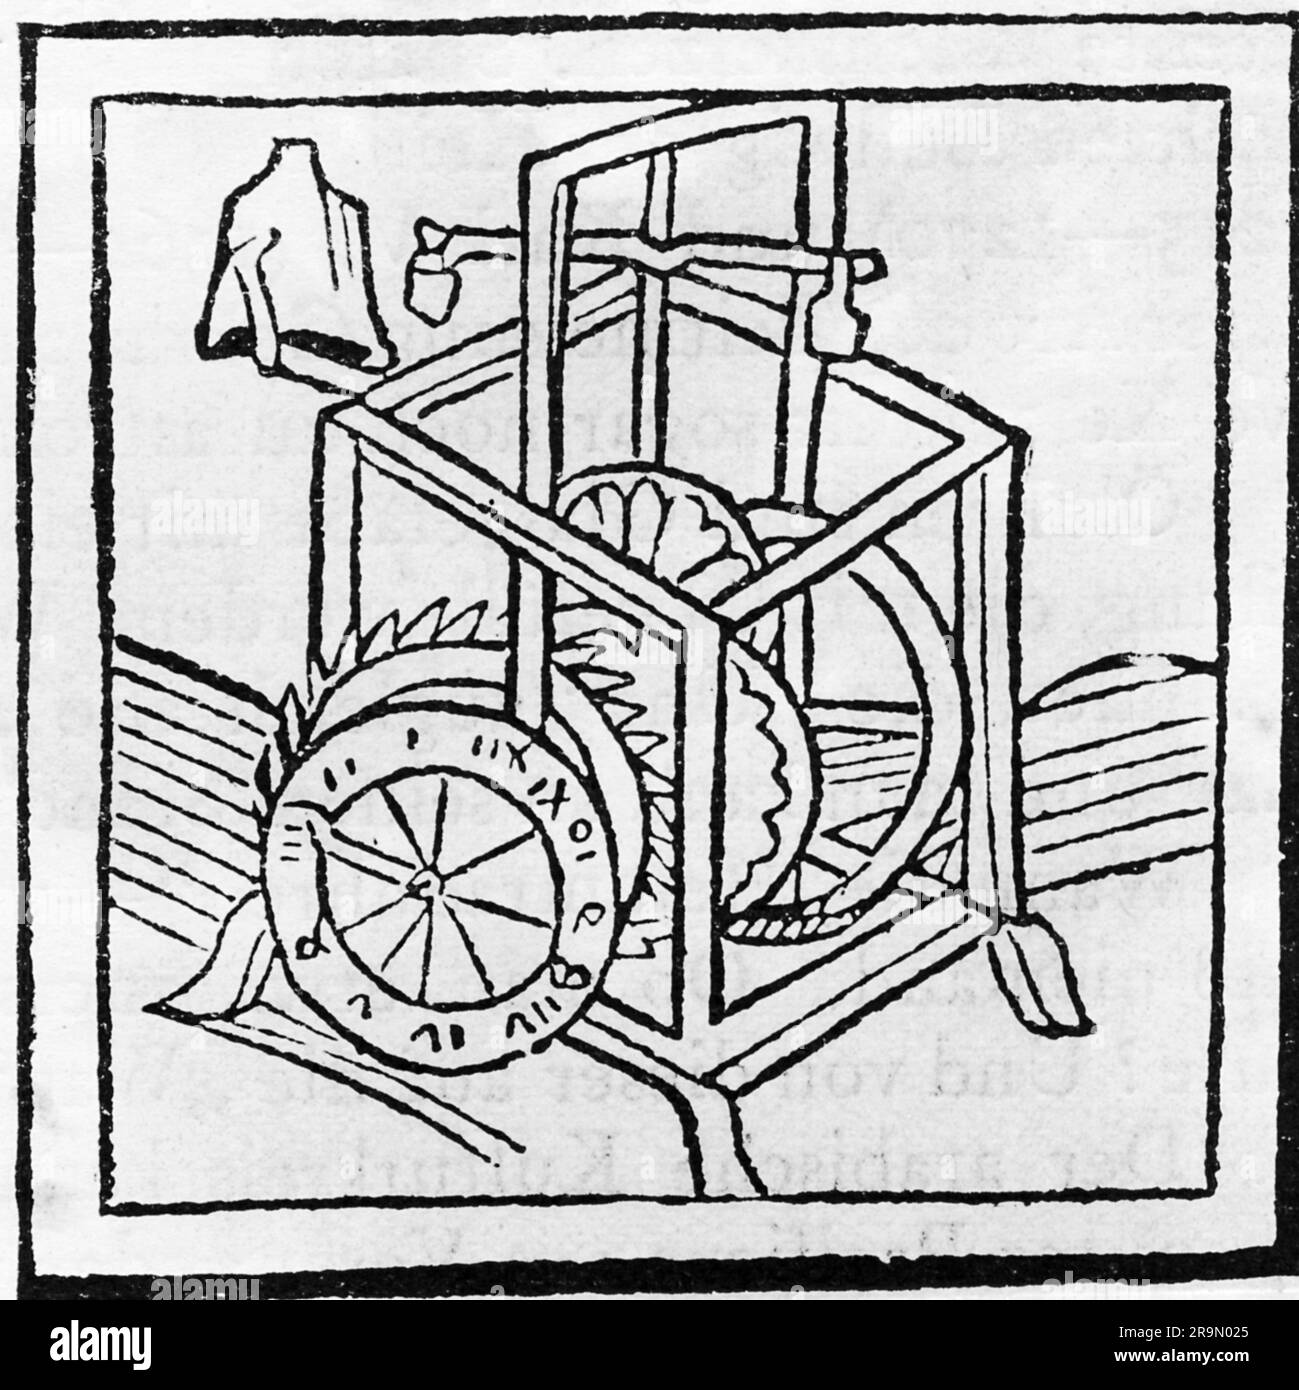 clock, escape wheel / wheel clocks, oldest known image of a clock with 'Wag', woodcut, ADDITIONAL-RIGHTS-CLEARANCE-INFO-NOT-AVAILABLE Stock Photo